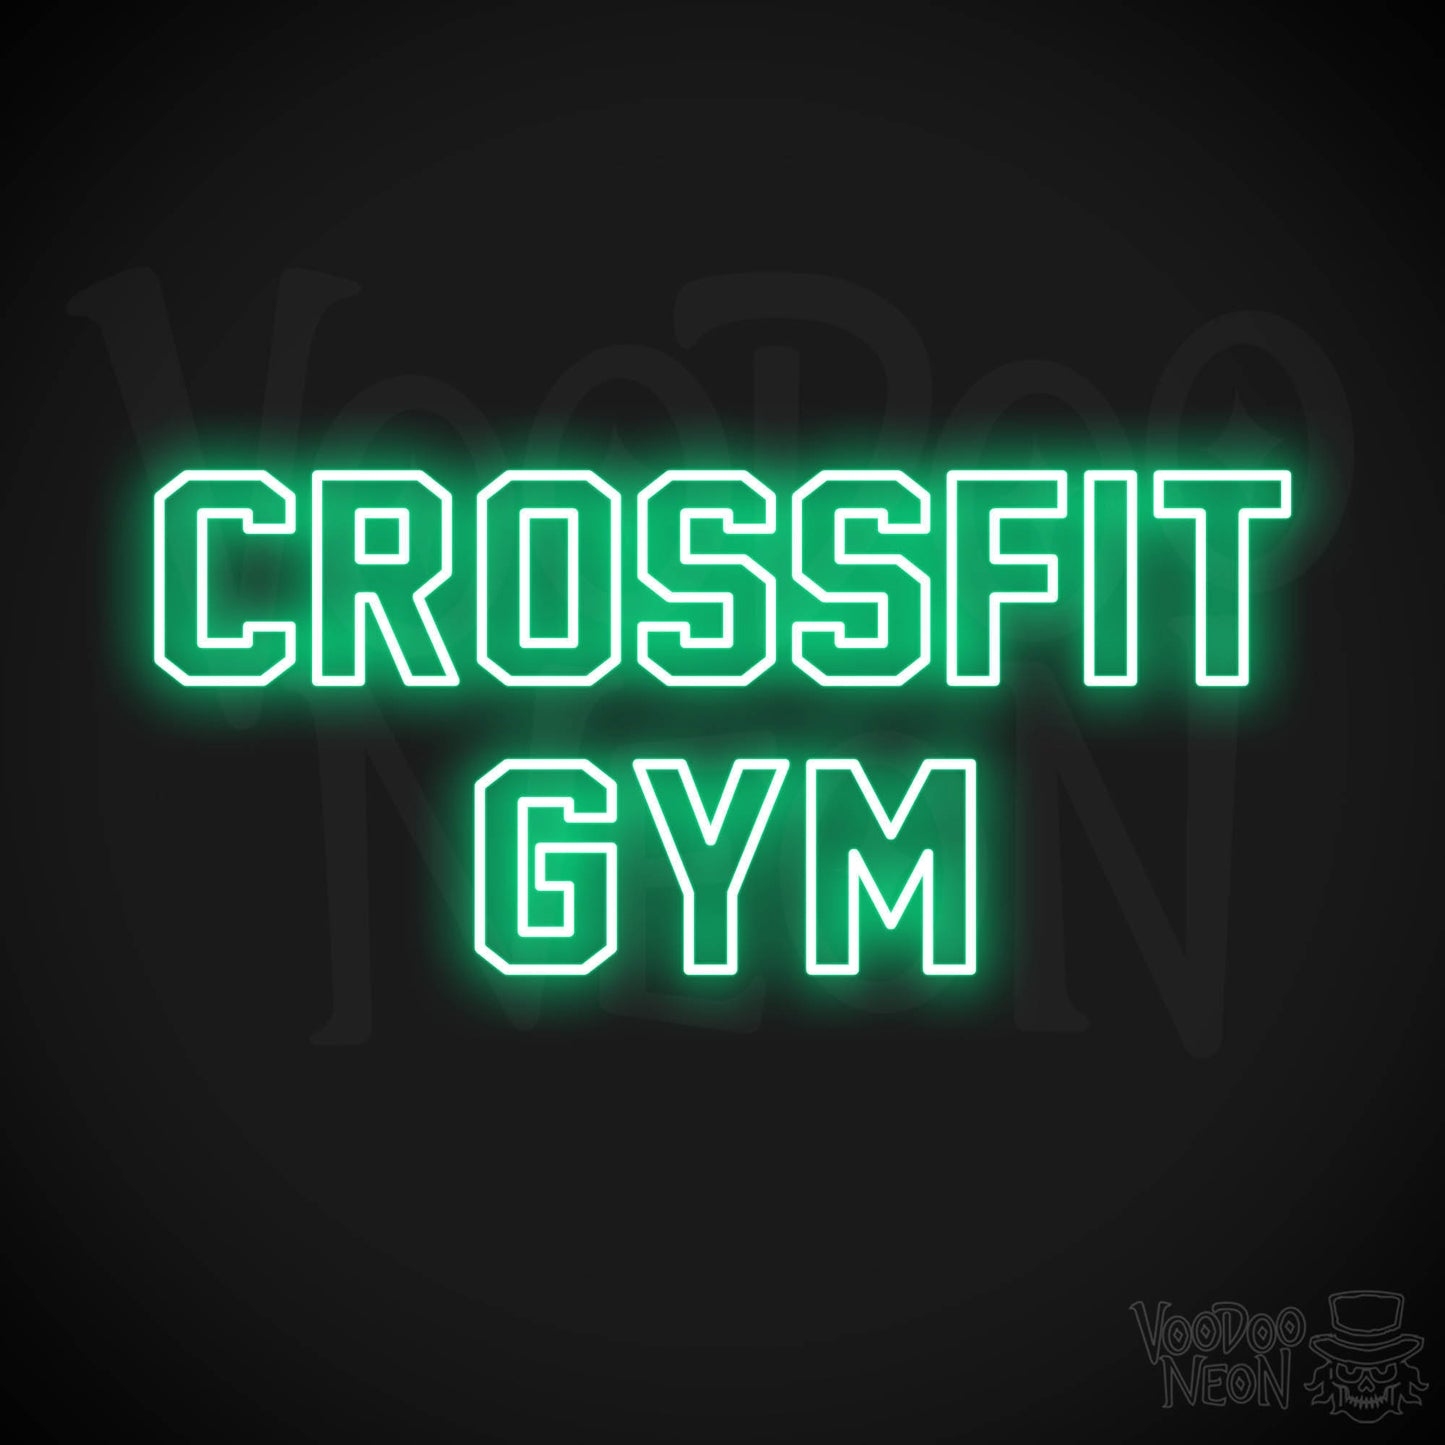 Crossfit Gym LED Neon - Green